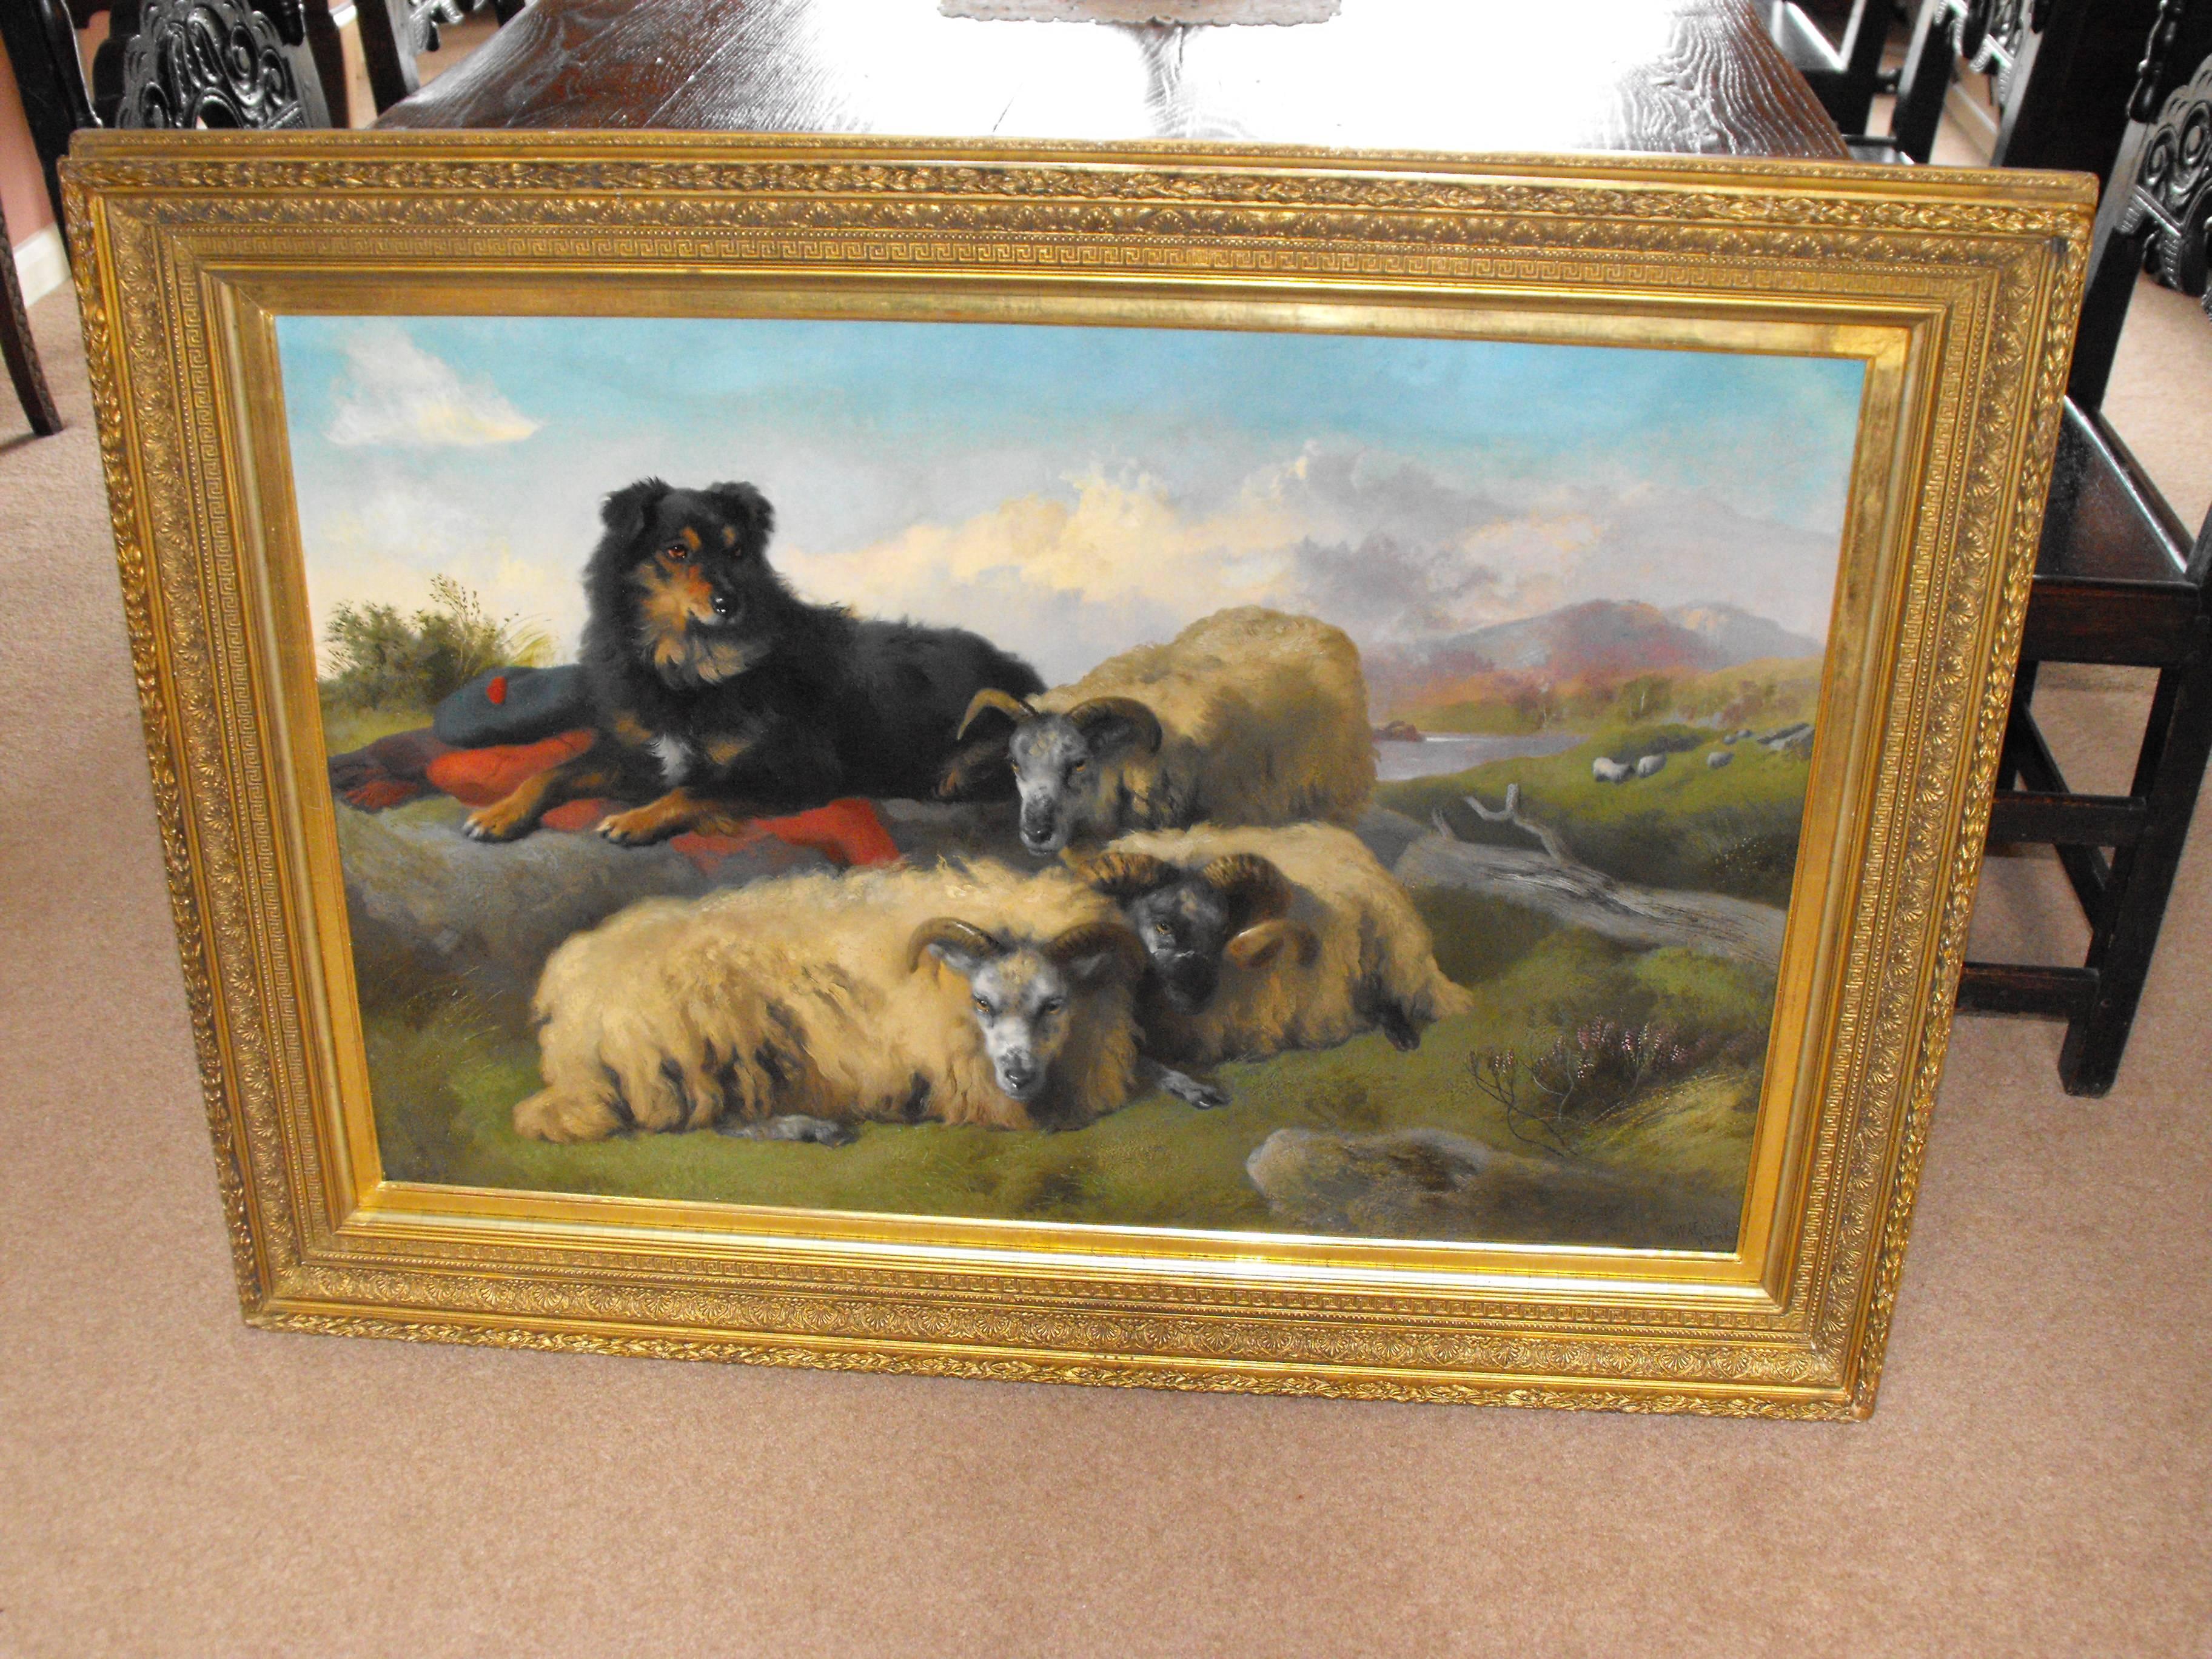 Antique Victorian oil painting landscape of sheep and sheep dog by Holgor 1870 - Painting by George William Horlor